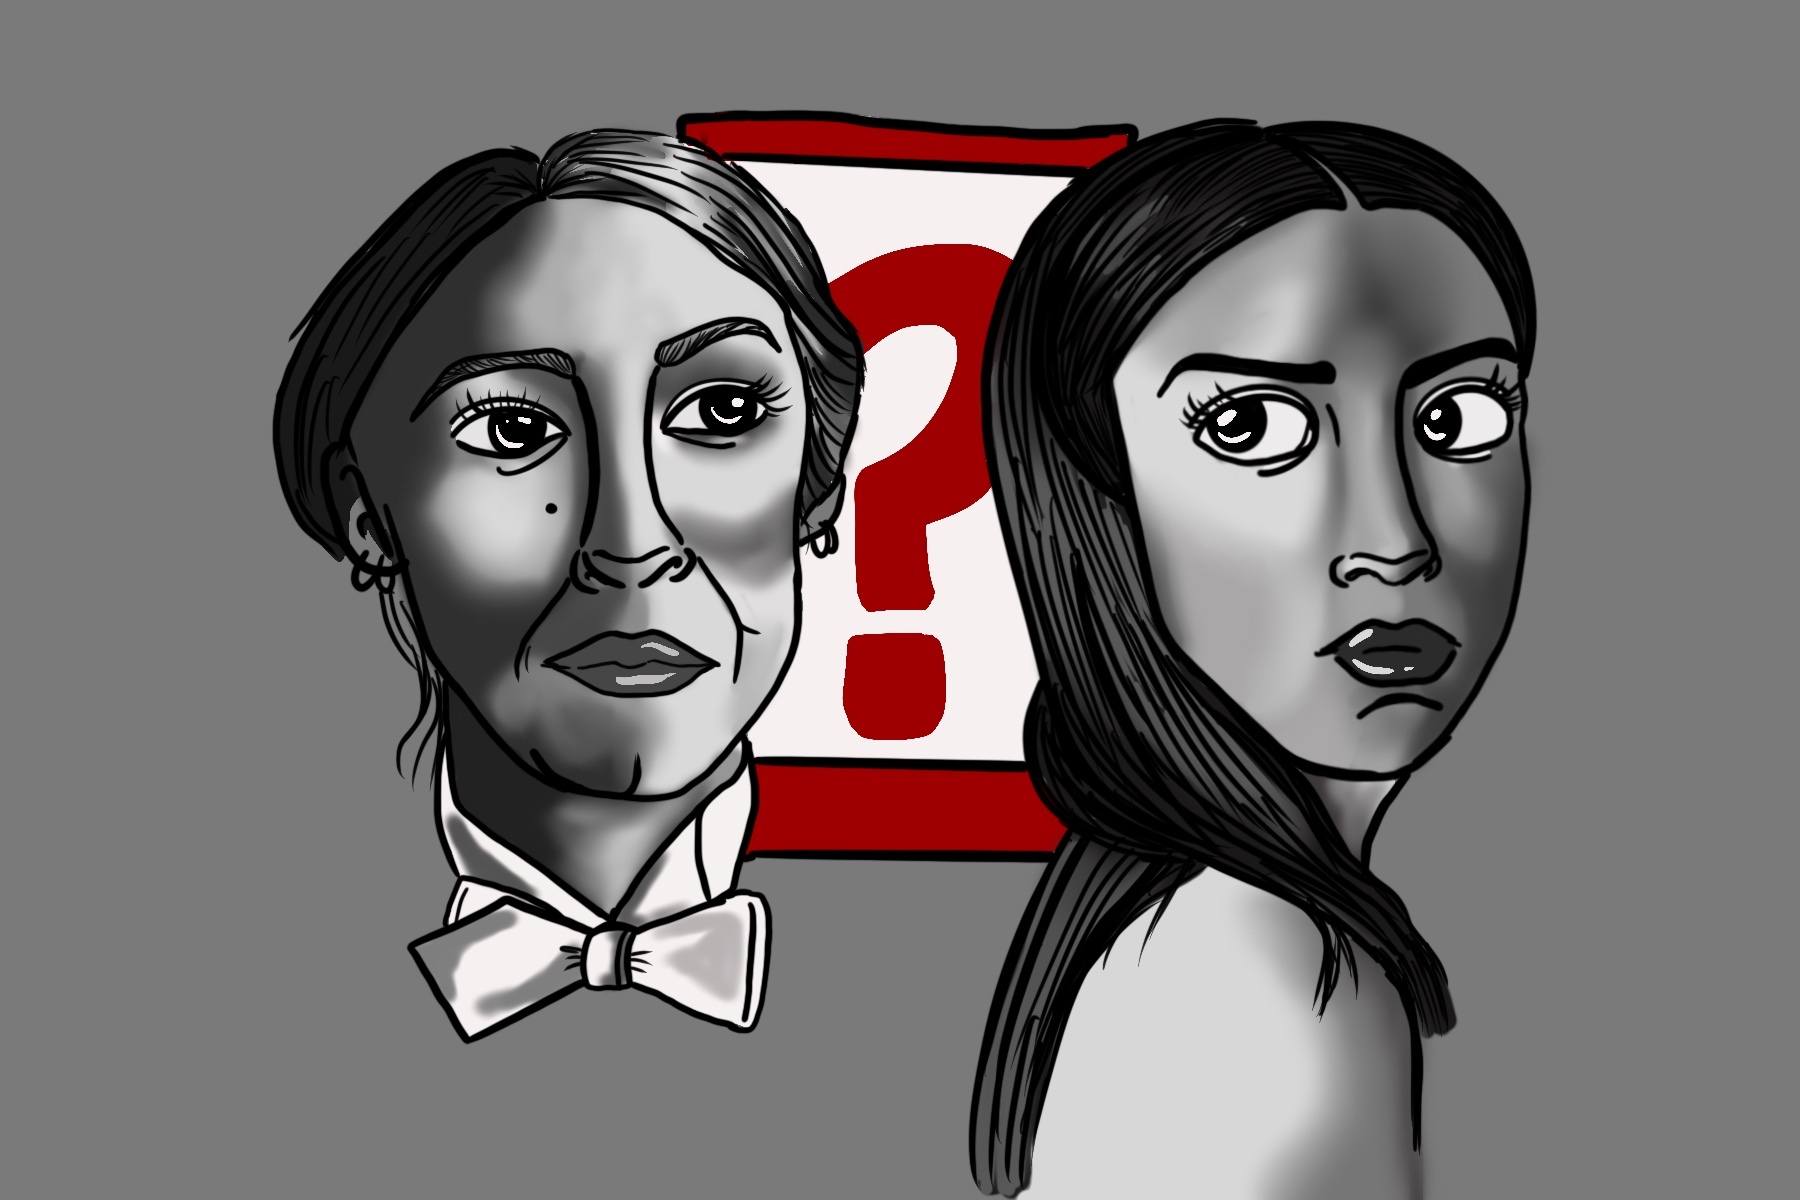 an illustration of two characters from A Simple Favor